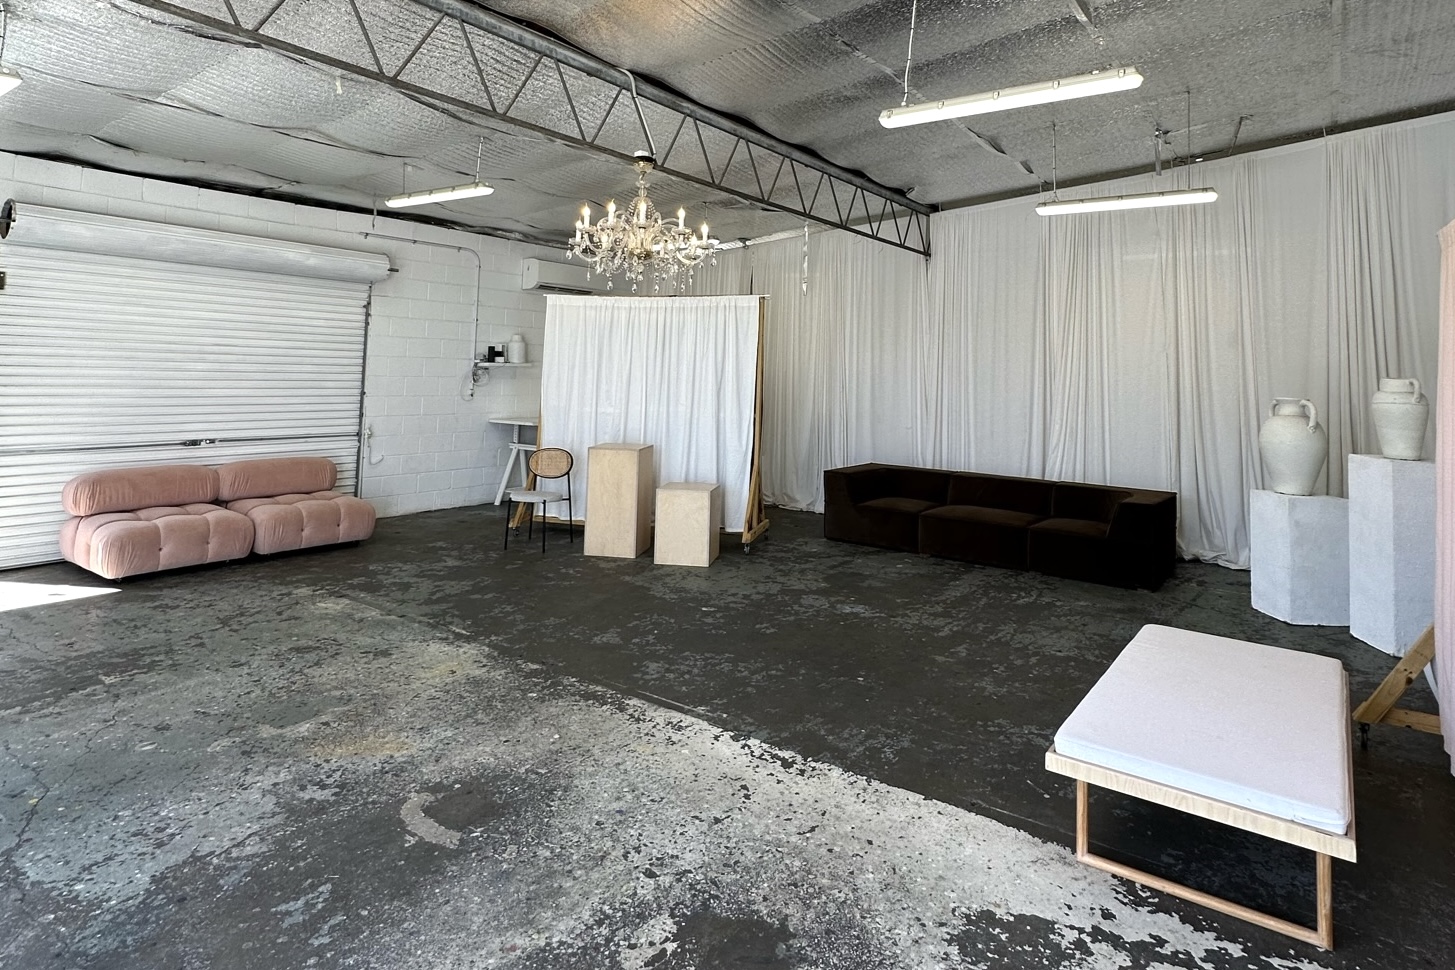 Natural Light Studio – Photoshoot & Event Space